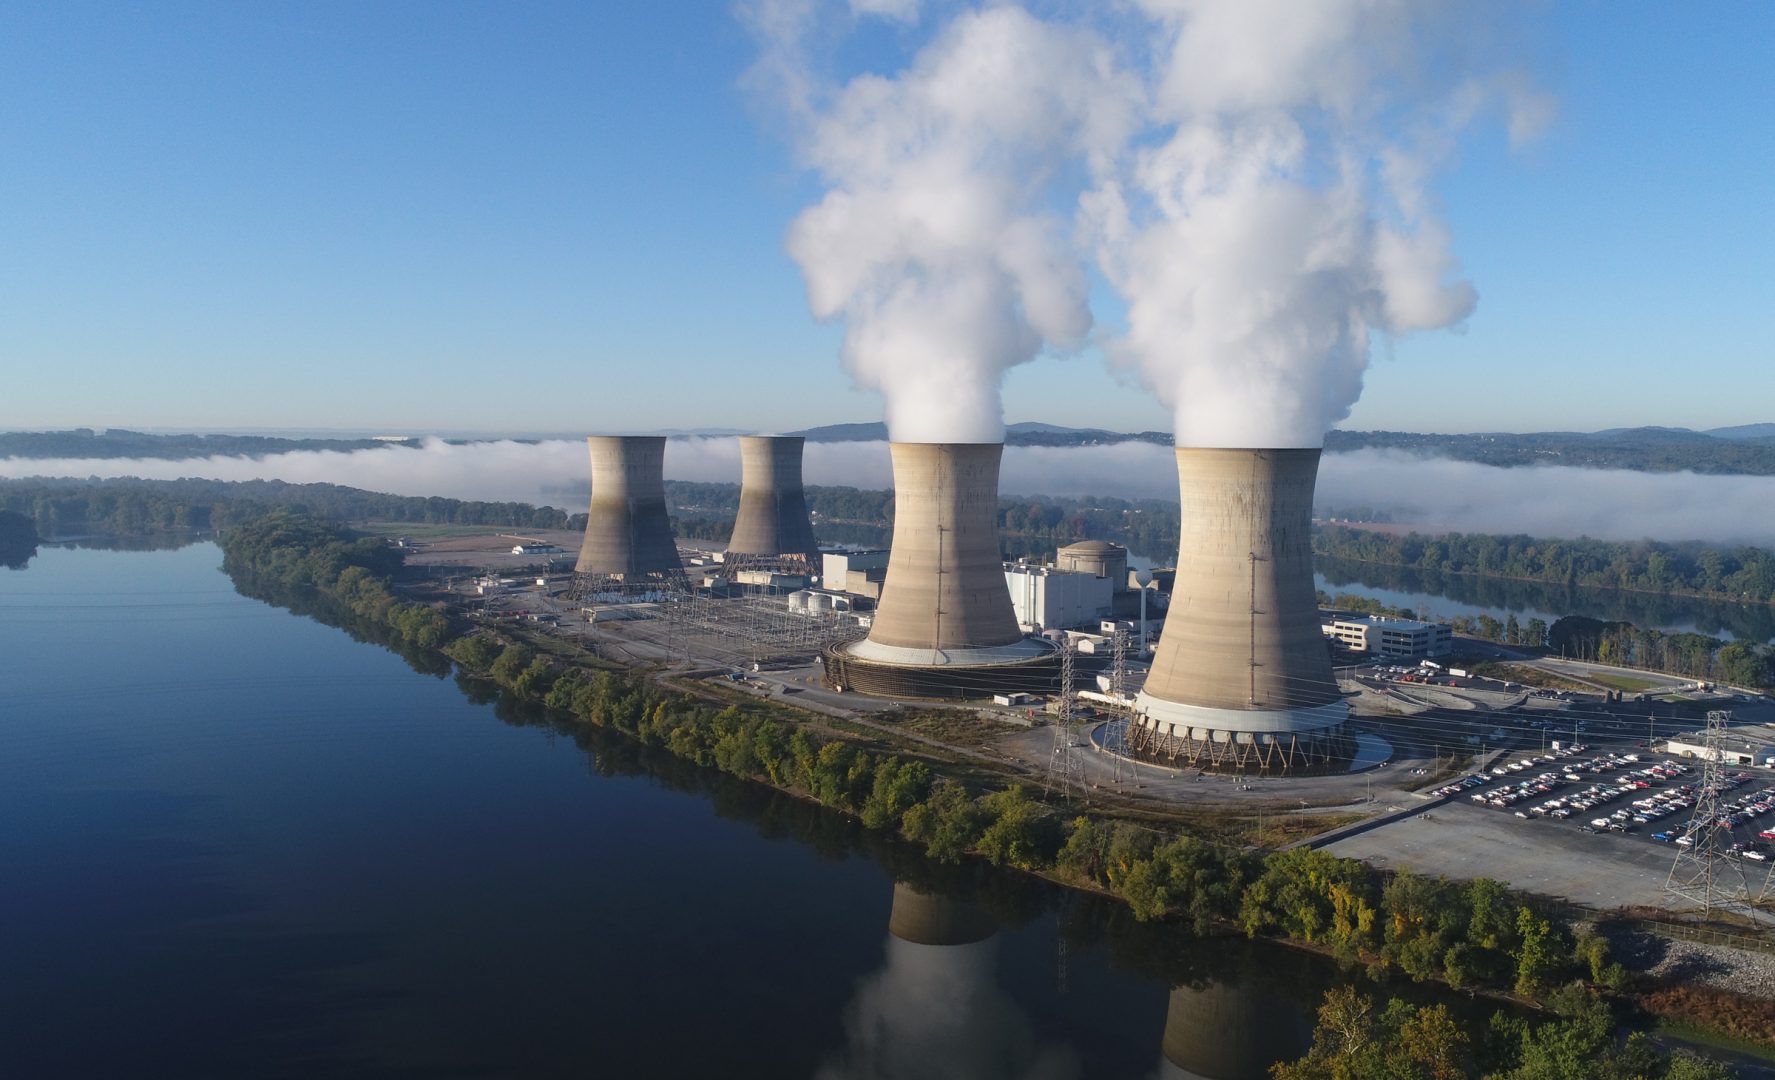 Exelon's Three Mile Island plant is scheduled to prematurely close in September 2019. The company has been lobbying for help from the state to keep it open.